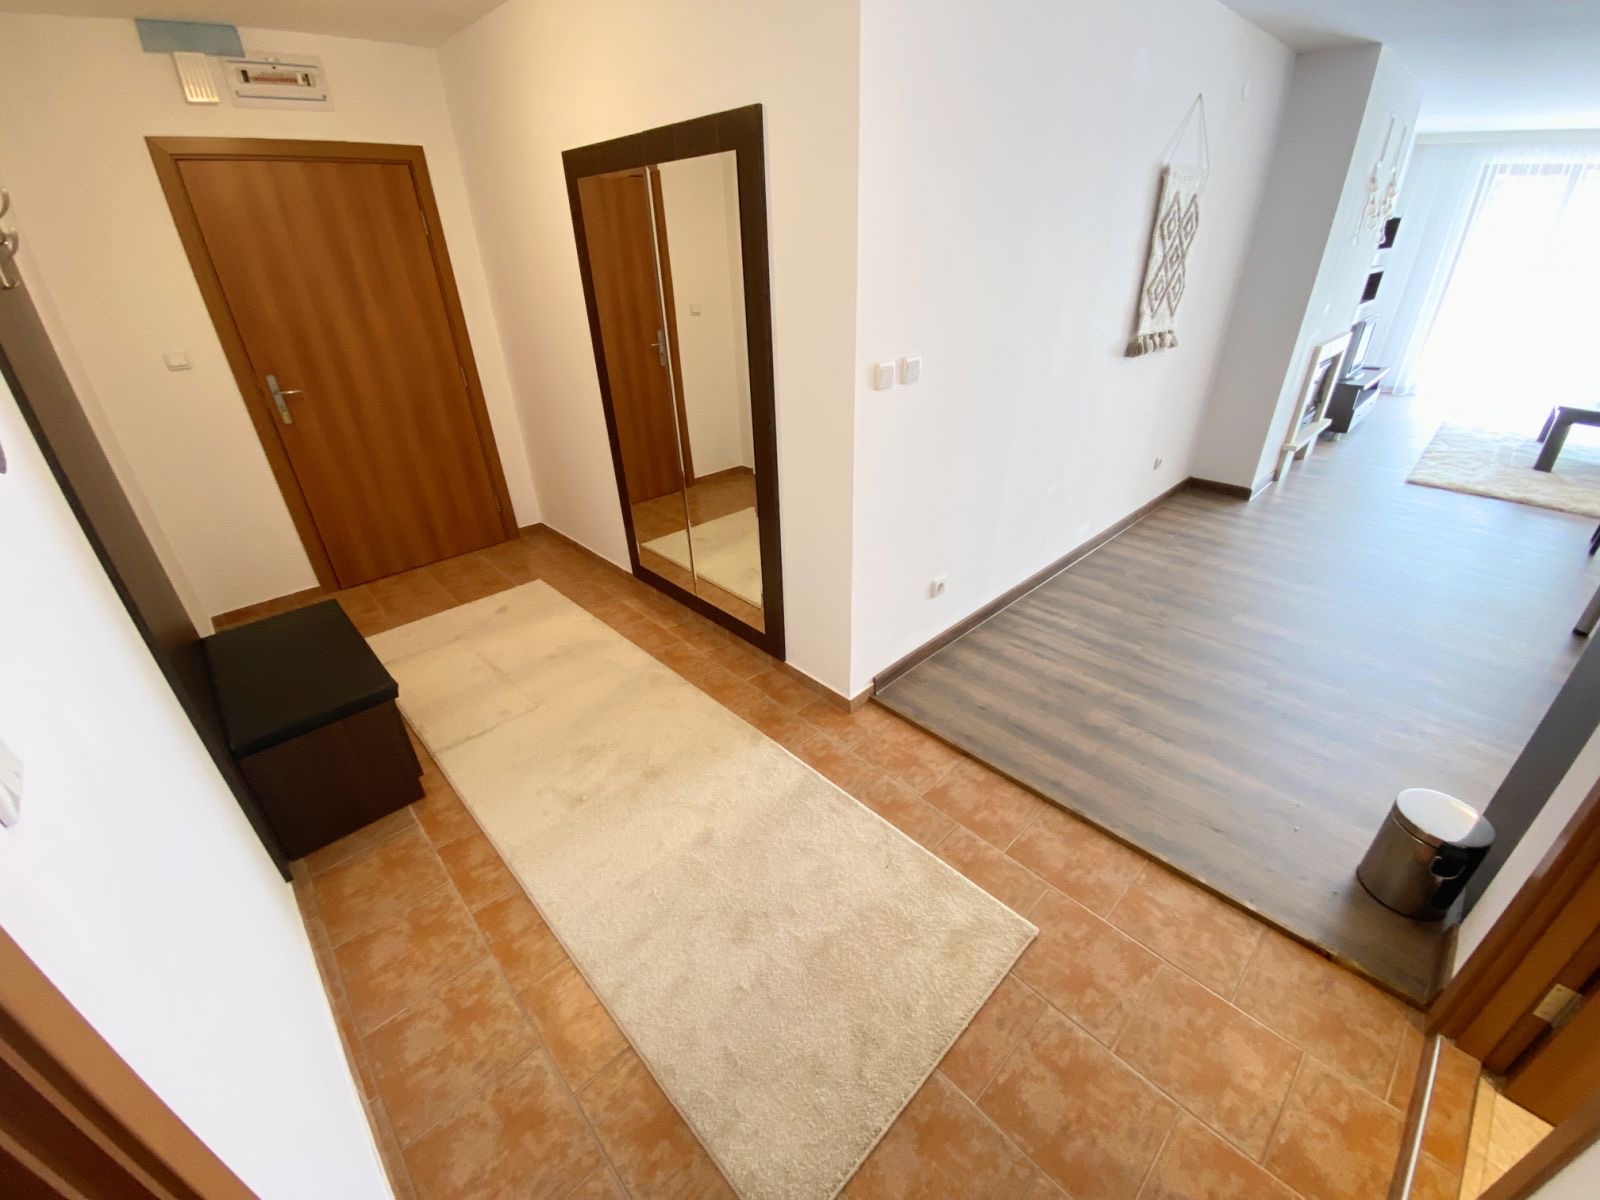 Bansko: Affordable one bedroom apartment for sale next to the White Lavina hotel